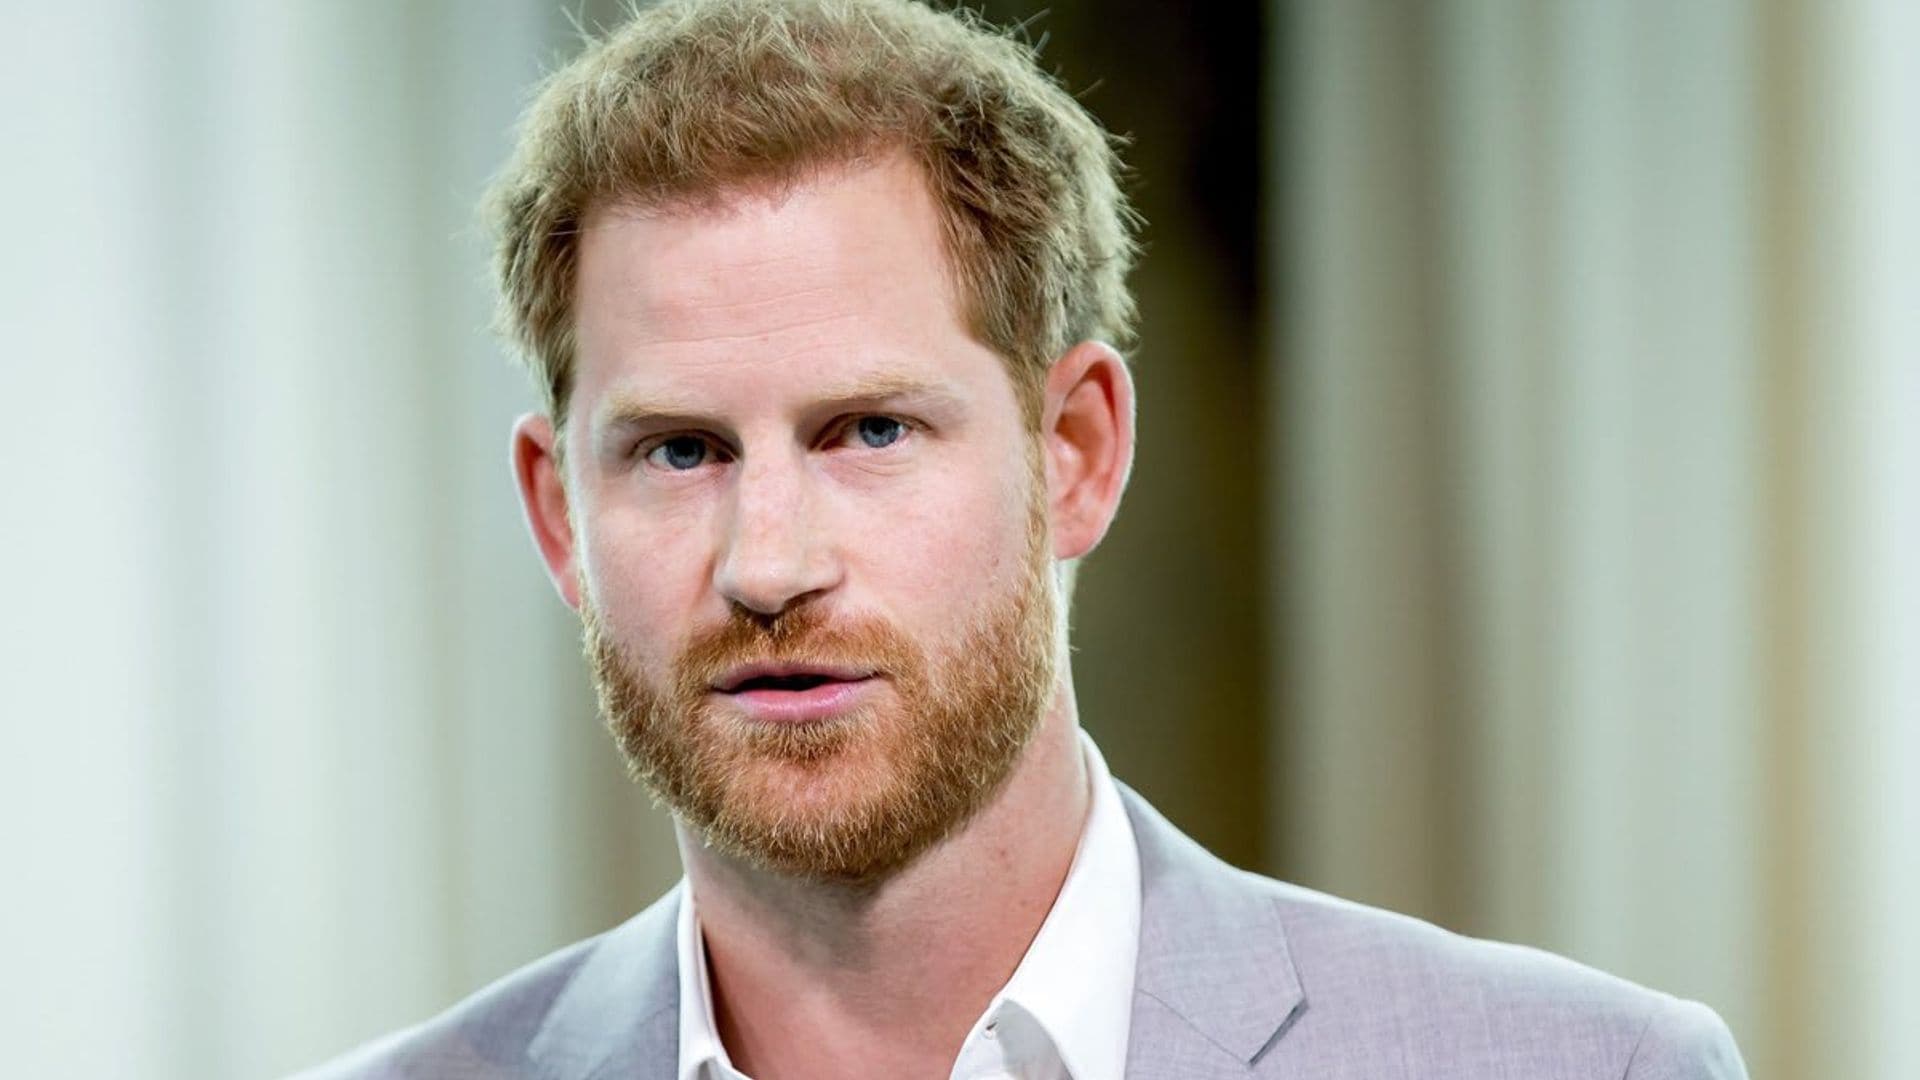 Prince Harry to return to UK less than one month after daughter Lili's birth